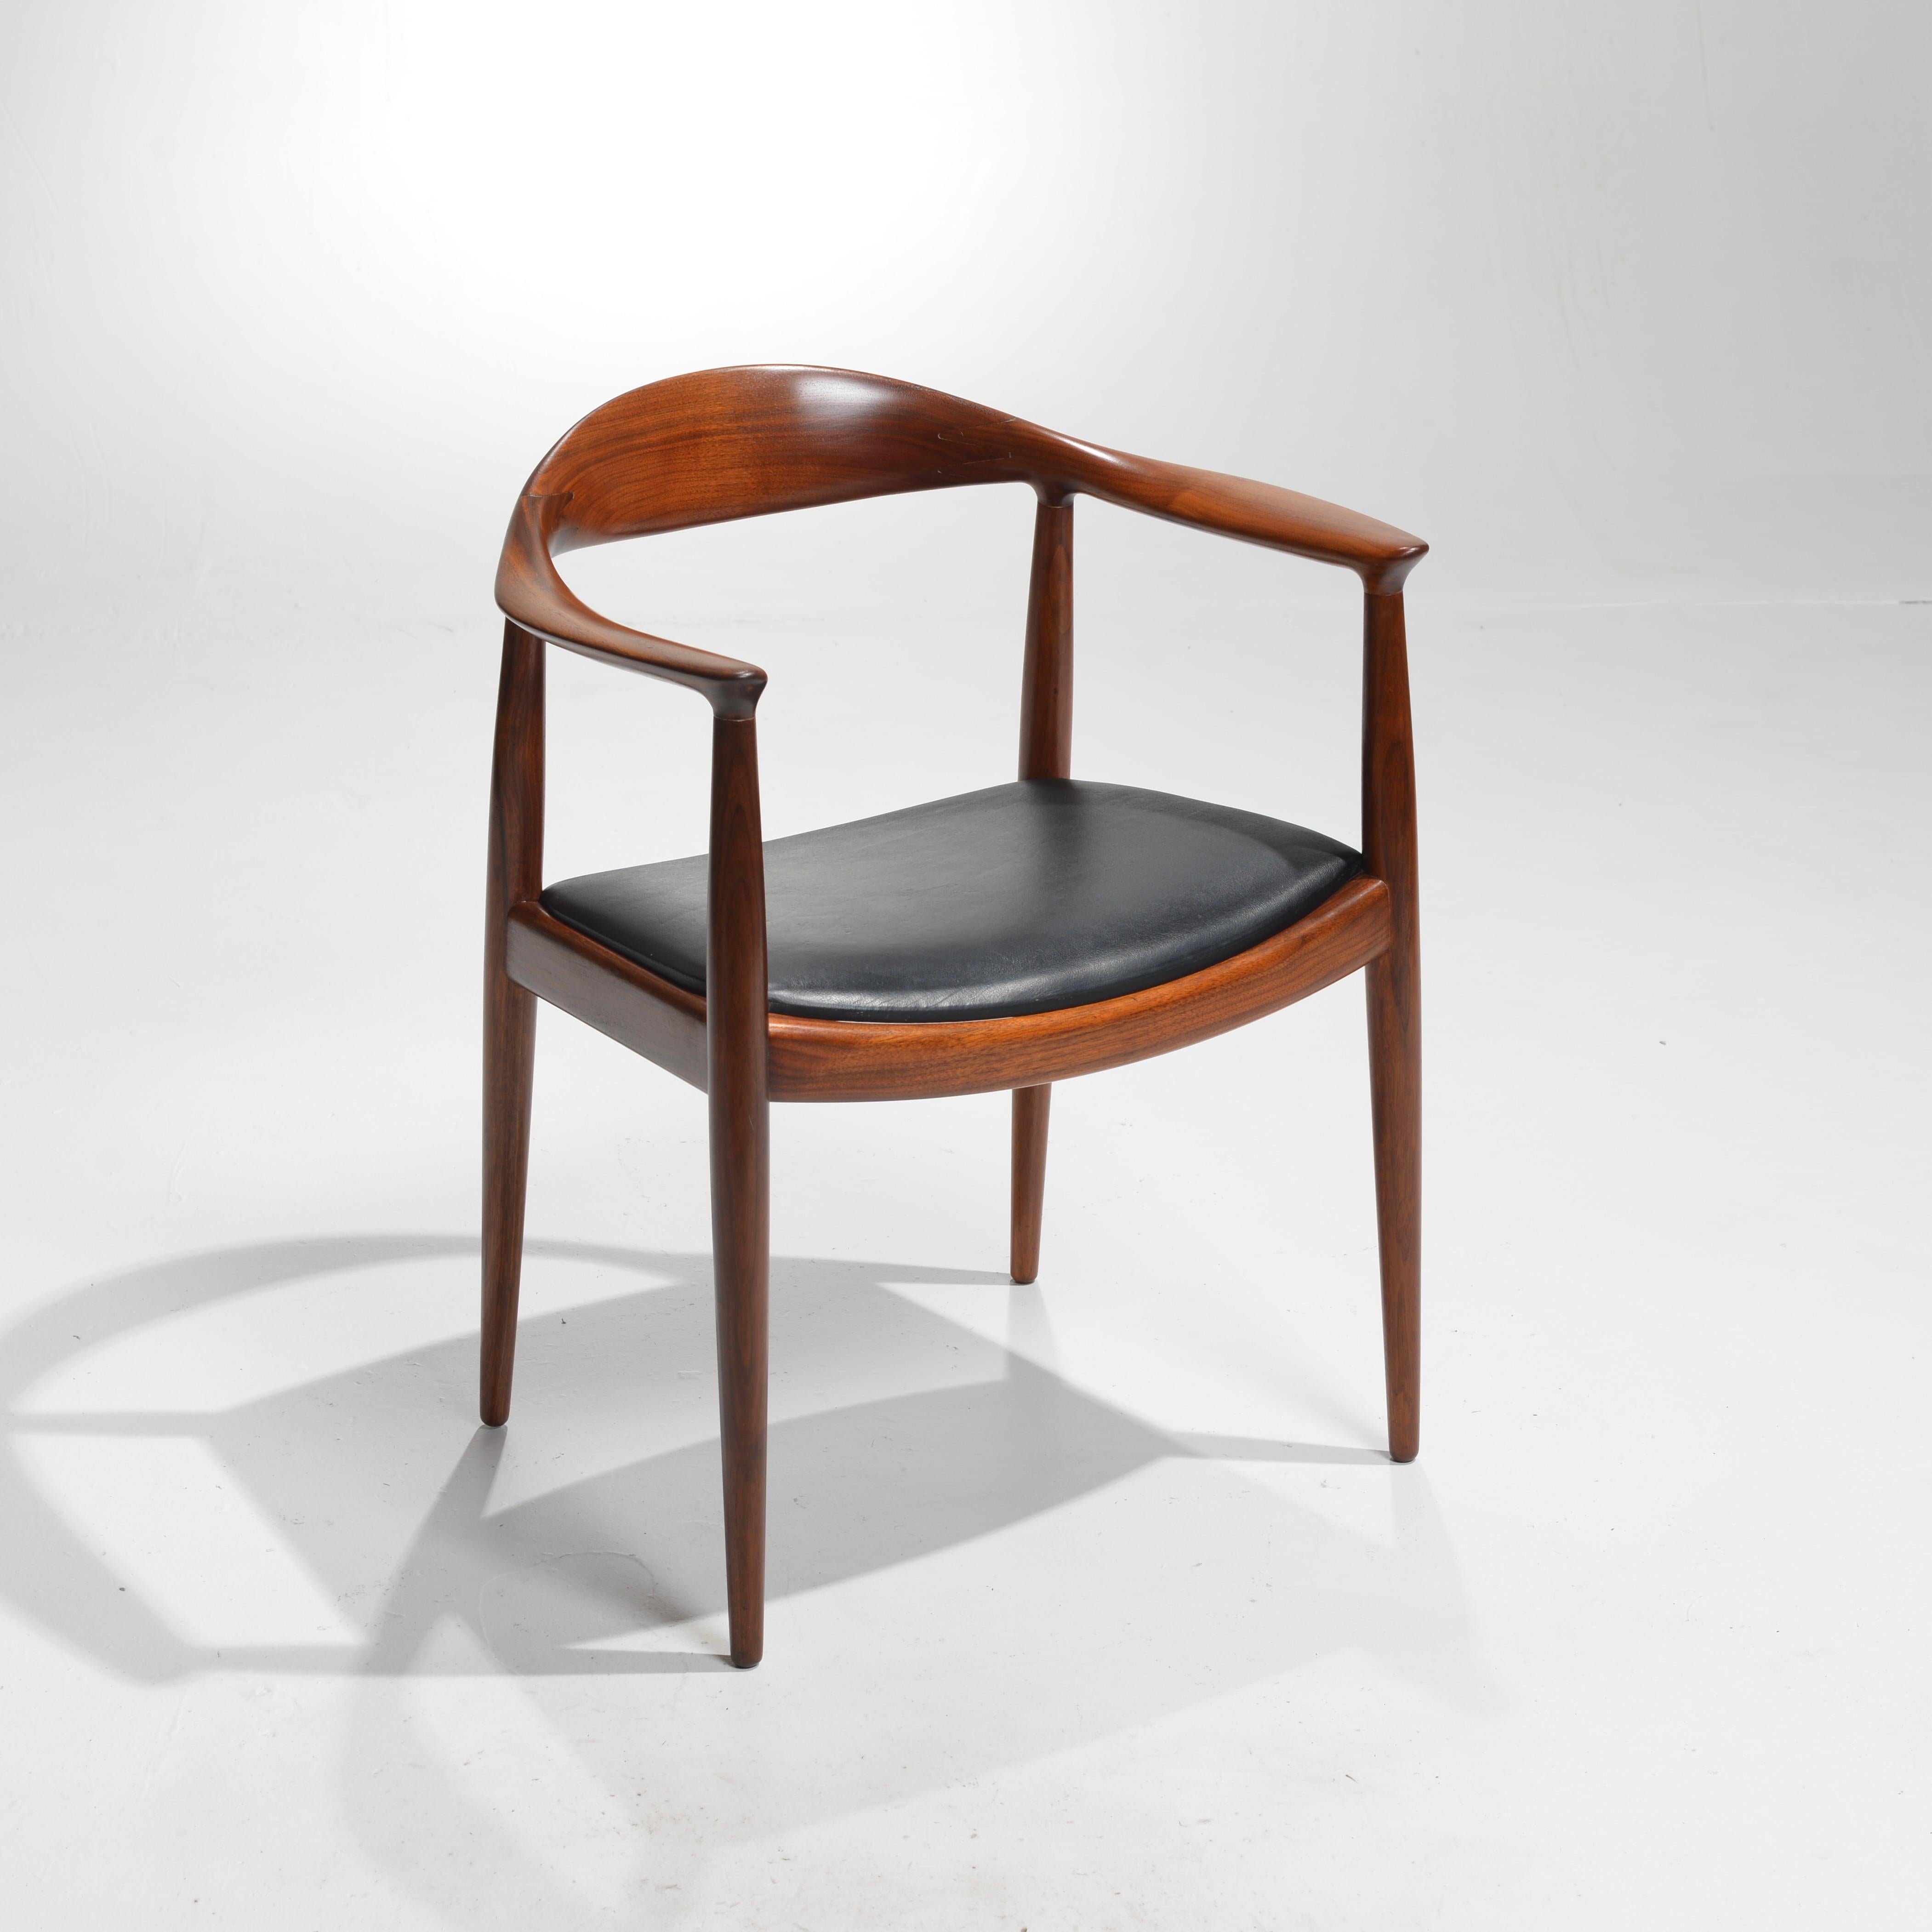 We are excited to offer 8 early Hans Wegner JH-503 chairs designed in 1949 and Produced by Johannes Hansen. Fully restored solid Walnut construction. Stamped with the maker's mark. Currently we have 8 in black leather. Priced per chair.

